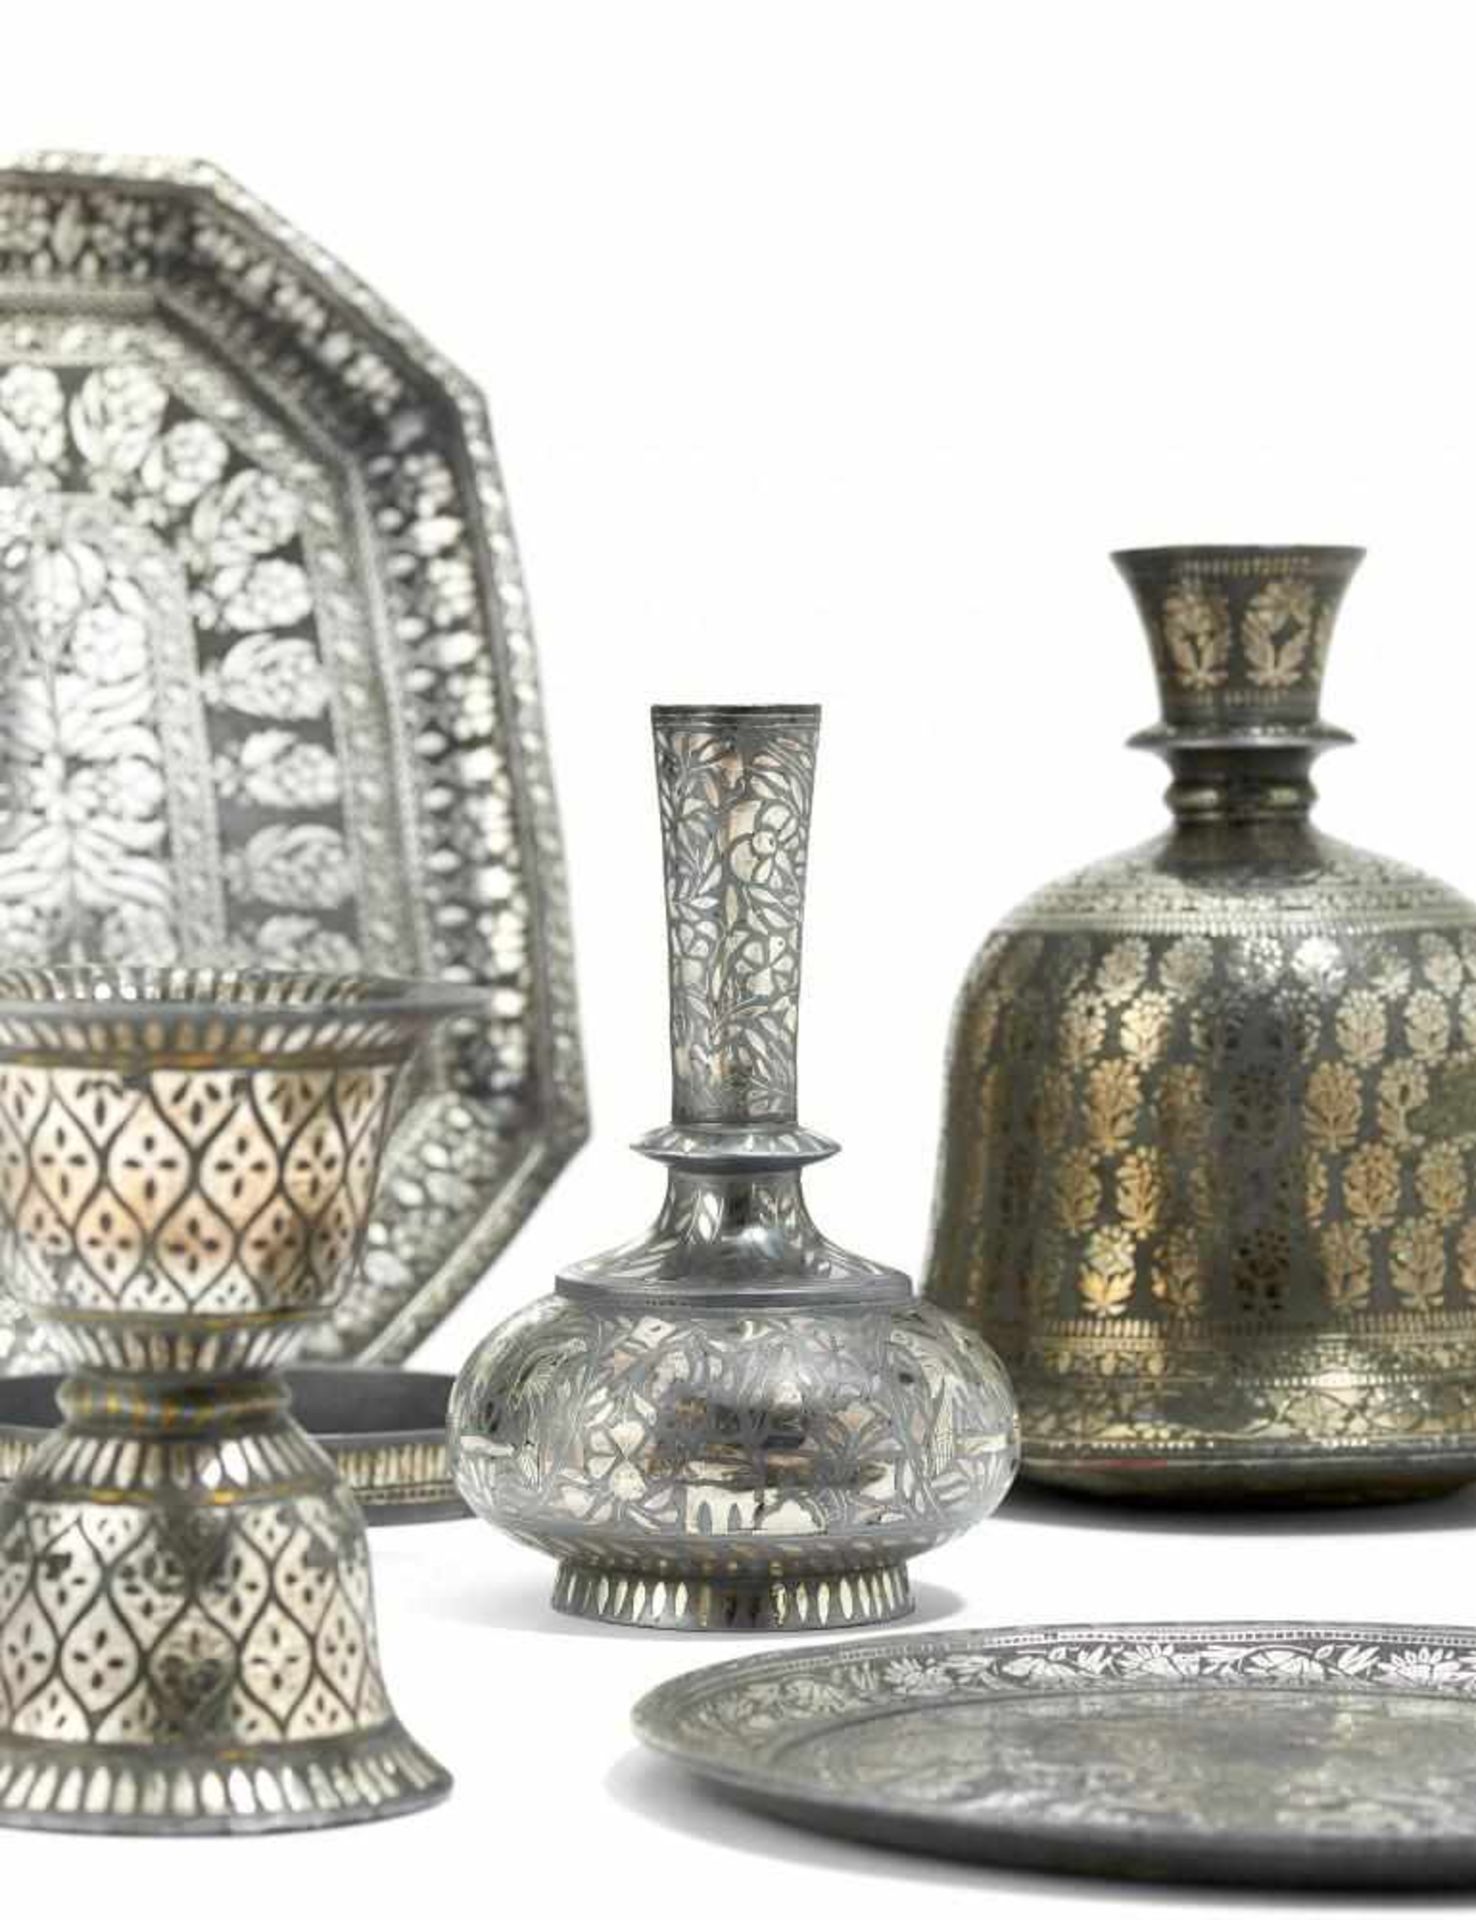 HUQQA BASES, SPITTOON AND PAAN DISH. India. 18th/19th c. Bidri ware. Bronze with silver inlay. Two